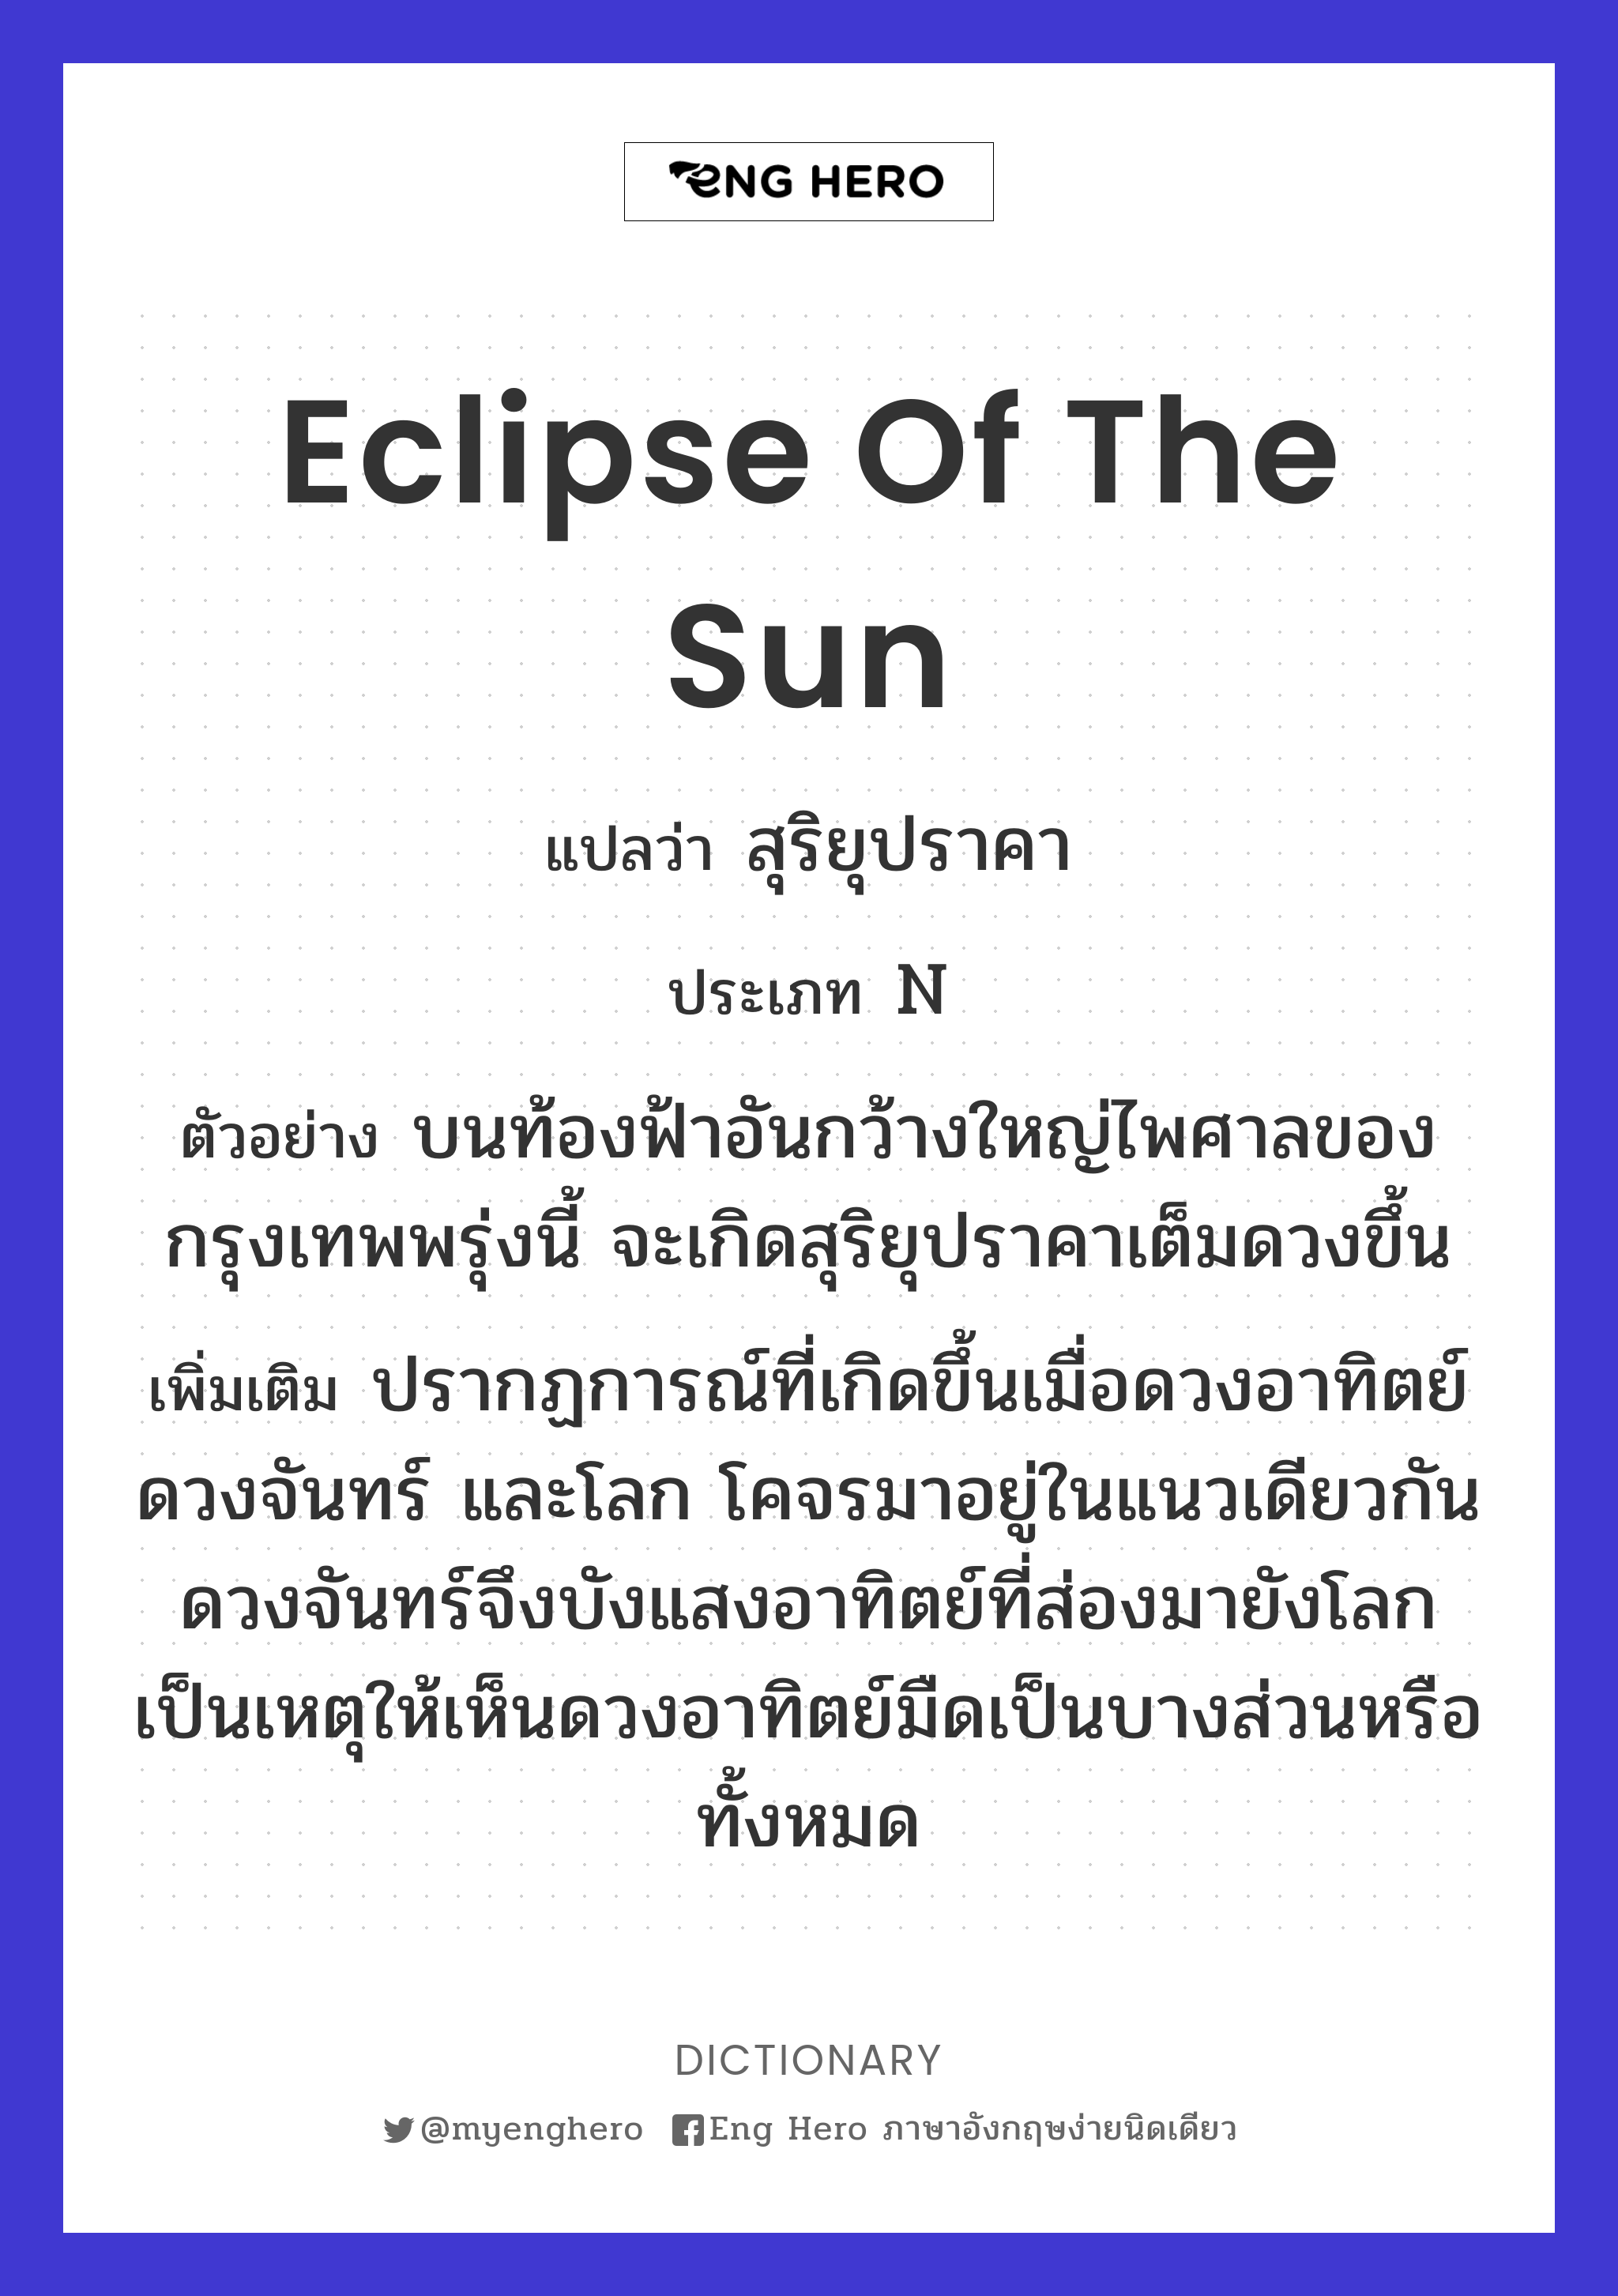 Eclipse of the sun